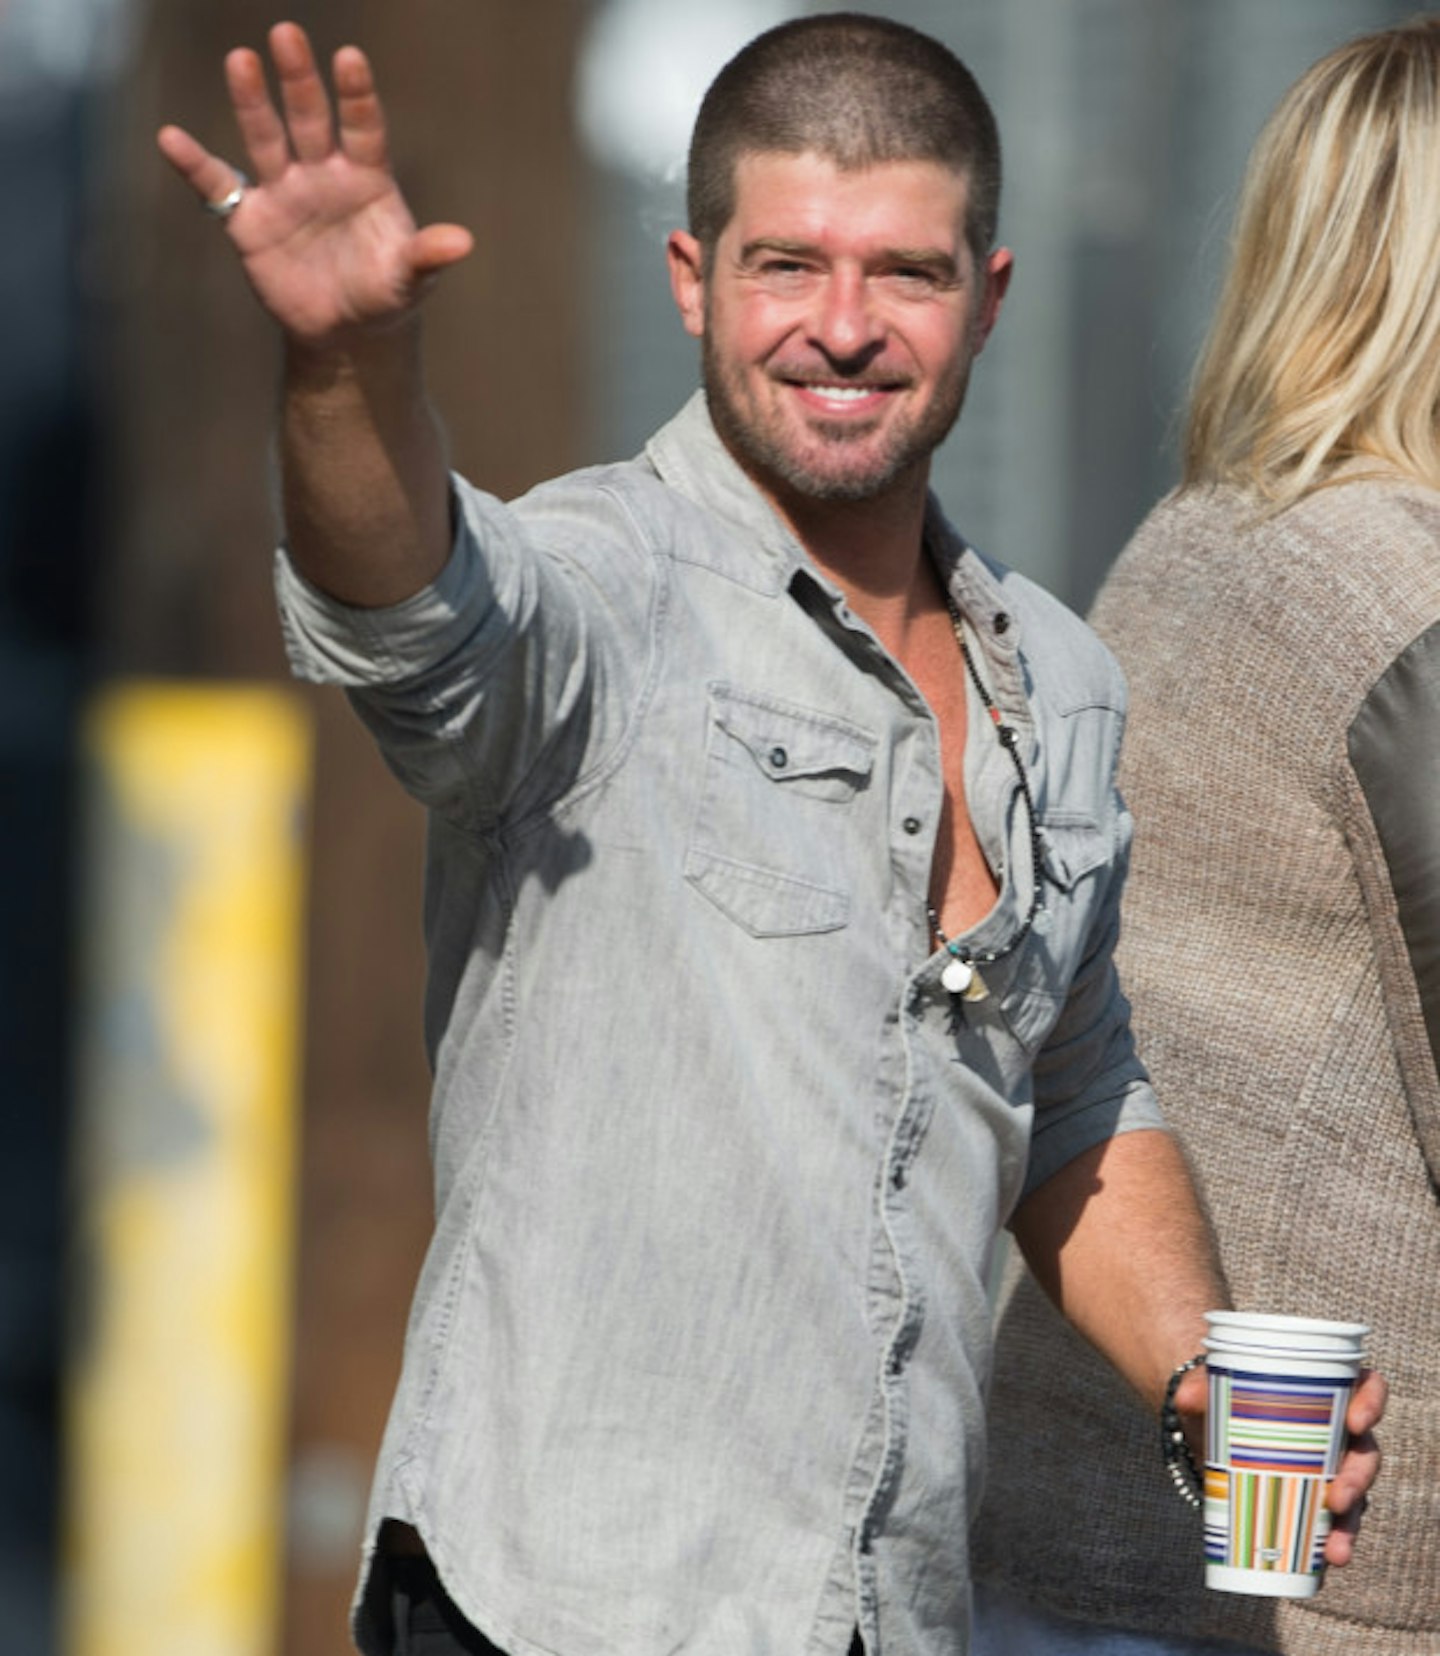 Robin Thicke asking for a high-five and being left hanging... FOREVER.